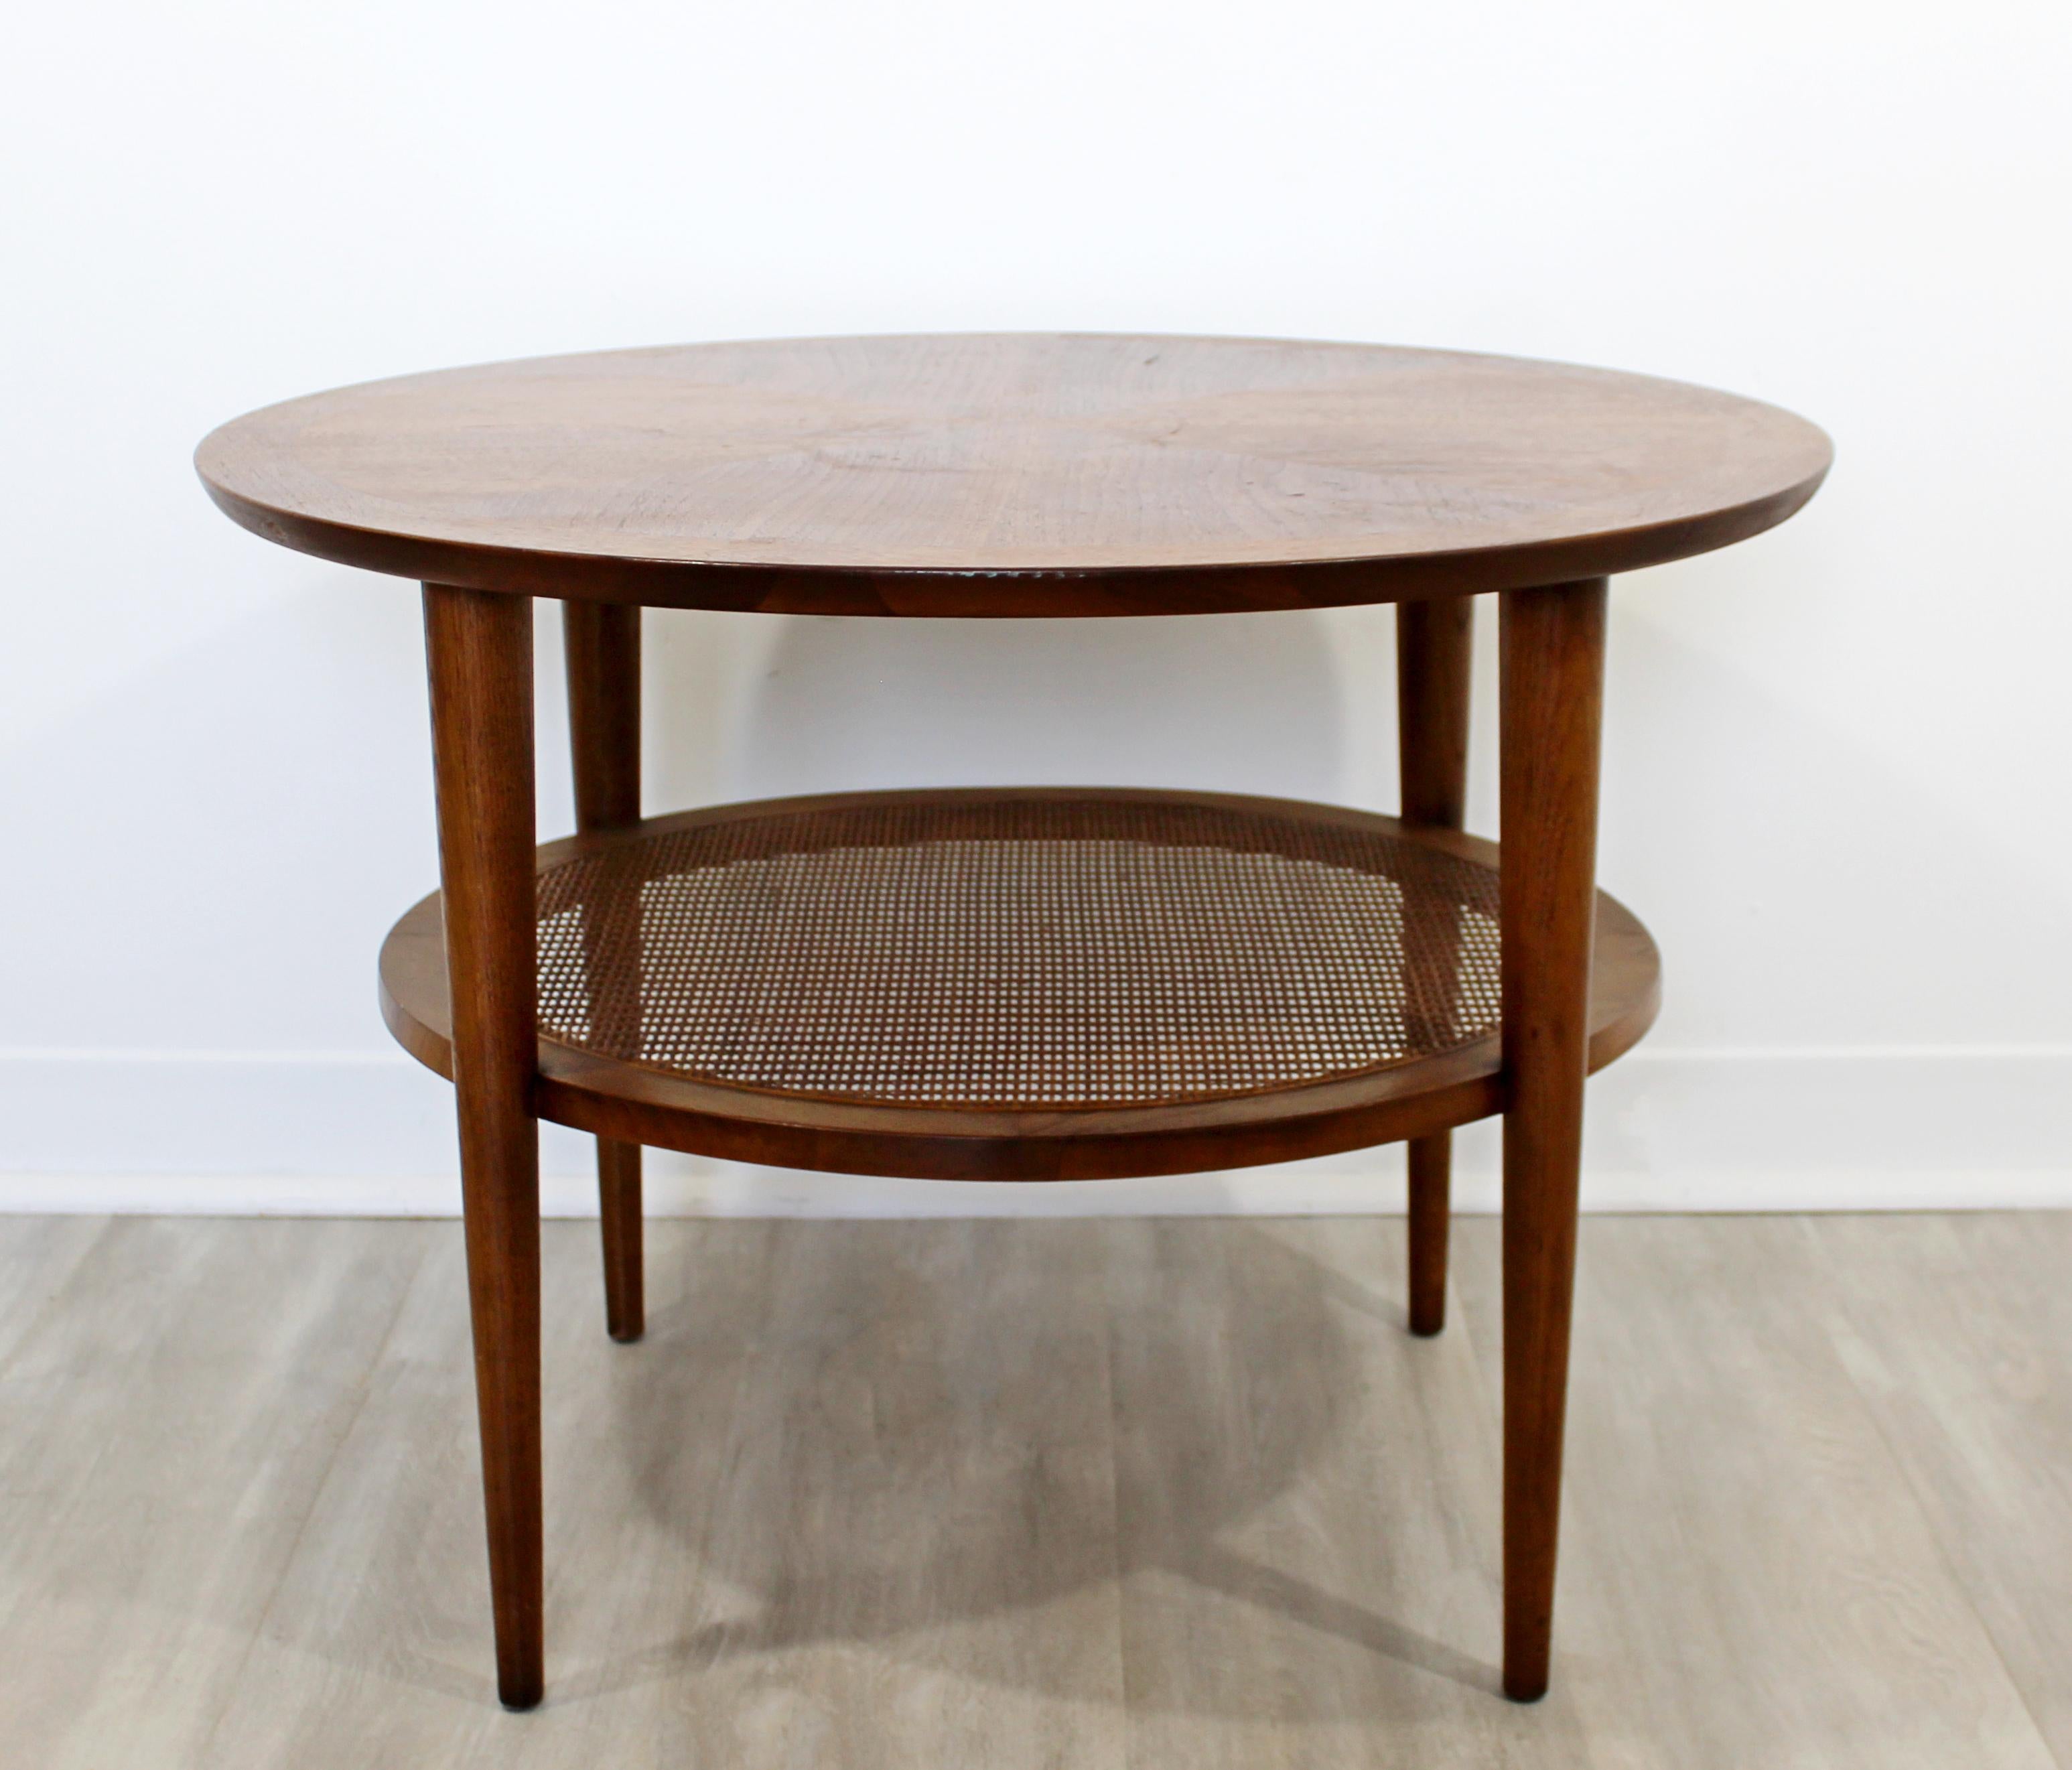 For your consideration is a phenomenal, small, circular coffee table, made of wood and with a cane shelf, by Lane Altavista, circa 1960s. In excellent vintage condition. The dimensions are 28